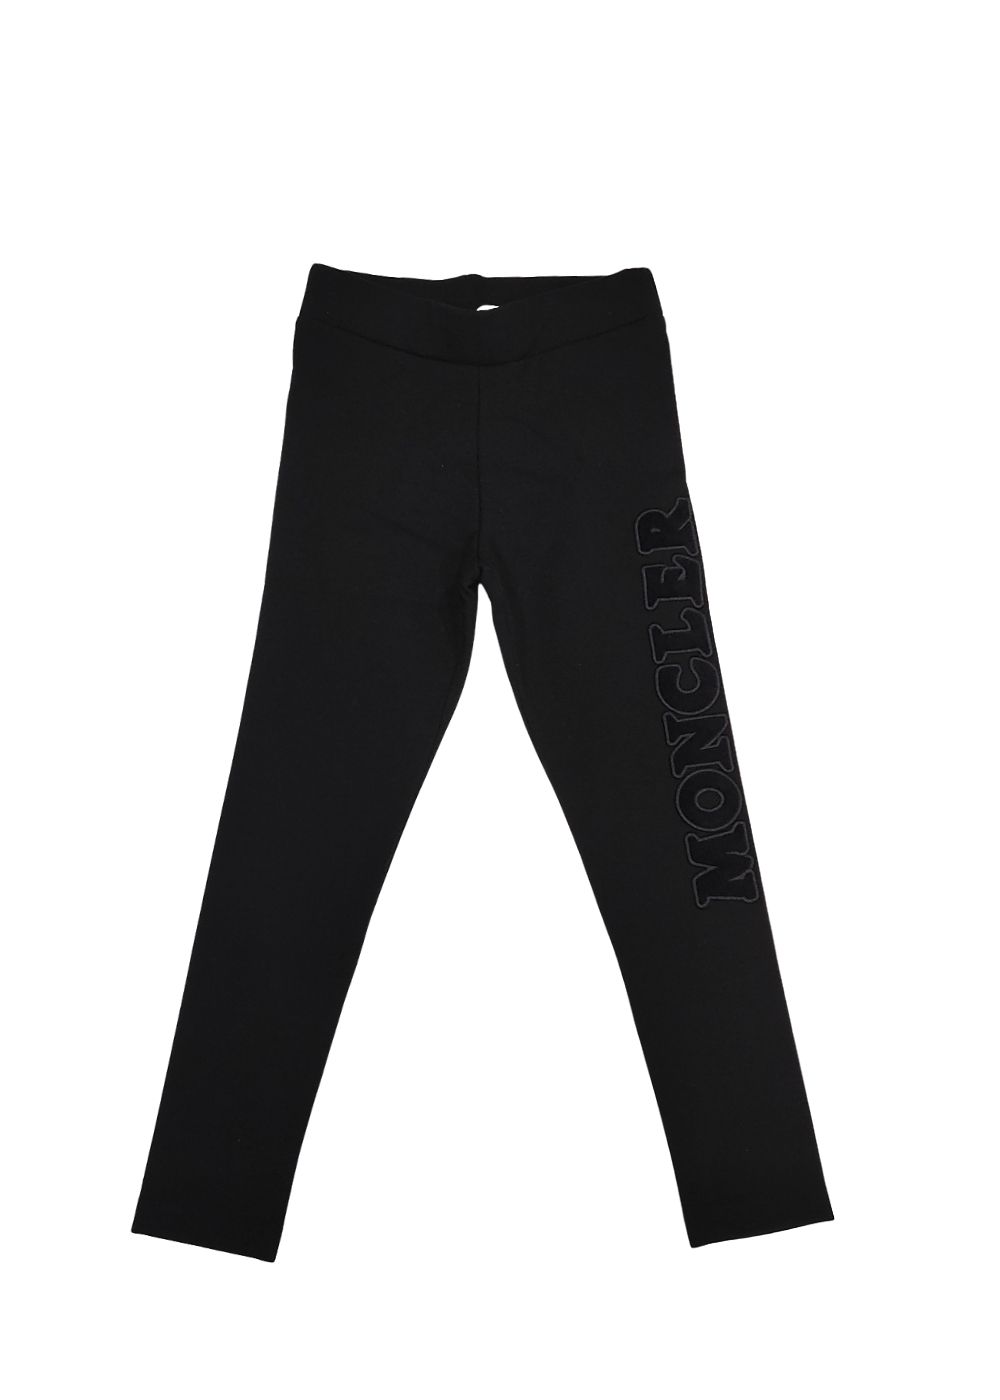 Featured image for “Moncler Leggings Nero”